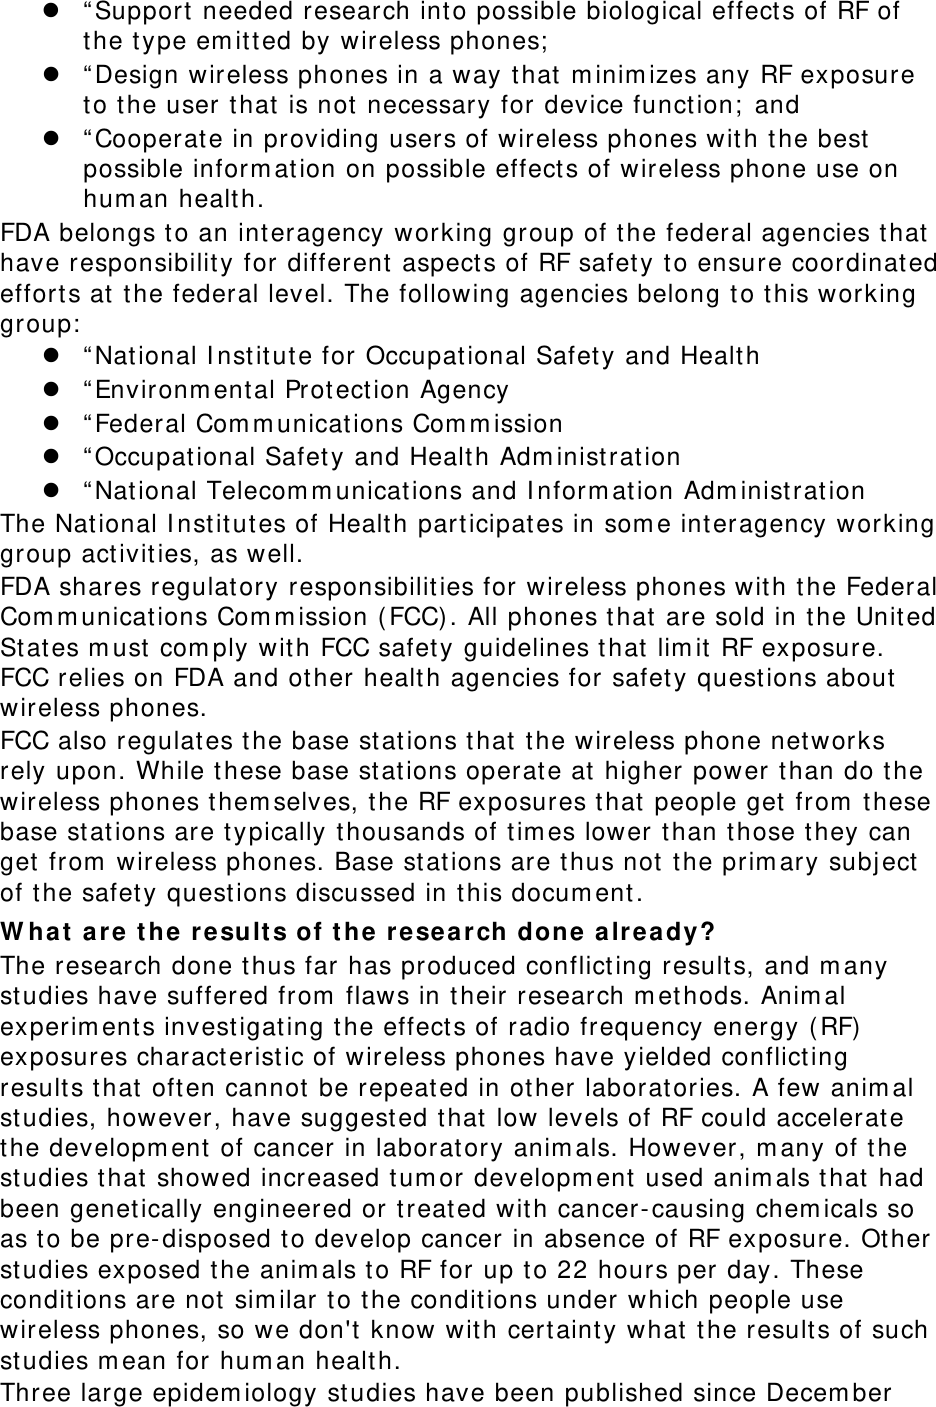  “ Support needed research int o possible biological effects of RF of the type em itt ed by  wireless phones;   “ Design wireless phones in a way t hat  m inim izes any RF exposure to the user that is not  necessary for device funct ion;  and  “ Cooperat e in providing users of wireless phones wit h the best  possible inform at ion on possible effect s of wireless phone use on hum an health. FDA belongs to an interagency working group of the federal agencies t hat  have responsibility for different  aspect s of RF safety to ensure coordinated effort s at  the federal level. The following agencies belong t o t his working group:   “ Nat ional I nst itute for Occupat ional Safety and Health  “ Environm ent al Prot ection Agency  “ Federal Com m unicat ions Com m ission  “ Occupat ional Safet y and Health Adm inistration  “ Nat ional Telecom m unications and I nfor m ation Adm inist ration The Nat ional I nstit ut es of Healt h par ticipat es in som e interagency working group act ivit ies, as well. FDA shares regulat or y responsibilit ies for wireless phones with the Federal Com m unicat ions Com m ission ( FCC) . All phones that  are sold in t he Unit ed St at es m ust  com ply wit h FCC safet y guidelines t hat  lim it RF exposure. FCC relies on FDA and other healt h agencies for safet y quest ions about wireless phones. FCC also regulates t he base st at ions t hat  the wireless phone net works rely upon. While t hese base st at ions operat e at higher pow er than do t he wireless phones them selves, the RF exposures t hat people get  from  these base st at ions are ty pically t housands of tim es lower than those they can get from  wireless phones. Base stations are t hus not  the prim ary subject  of the safet y quest ions discussed in this docum ent. W h at  are  the resu lts of t he  re search done alrea dy? The research done t hus far has produced conflict ing result s, and m any studies have suffered from  flaws in t heir  resear ch m et hods. Anim al exper im ents invest igat ing t he effects of radio frequency energy ( RF)  exposures charact erist ic of wireless phones have yielded conflicting result s that often cannot be repeat ed in other laborat ories. A few anim al studies, however, have suggest ed that low  levels of RF could accelerat e the developm ent  of cancer in laborat ory anim als. However, m any of t he studies t hat  showed incr eased tum or developm ent used anim als t hat had been genetically engineered or treat ed wit h cancer-causing chem icals so as to be pre-disposed t o develop cancer in absence of RF exposure. Ot her studies exposed the anim als to RF for up to 22 hours per  day. These condit ions are not  sim ilar to the condit ions under which people use wireless phones, so we don&apos;t know  wit h certaint y what  t he result s of such studies m ean for hum an health. Three large epidem iology st udies have been published since Decem ber 